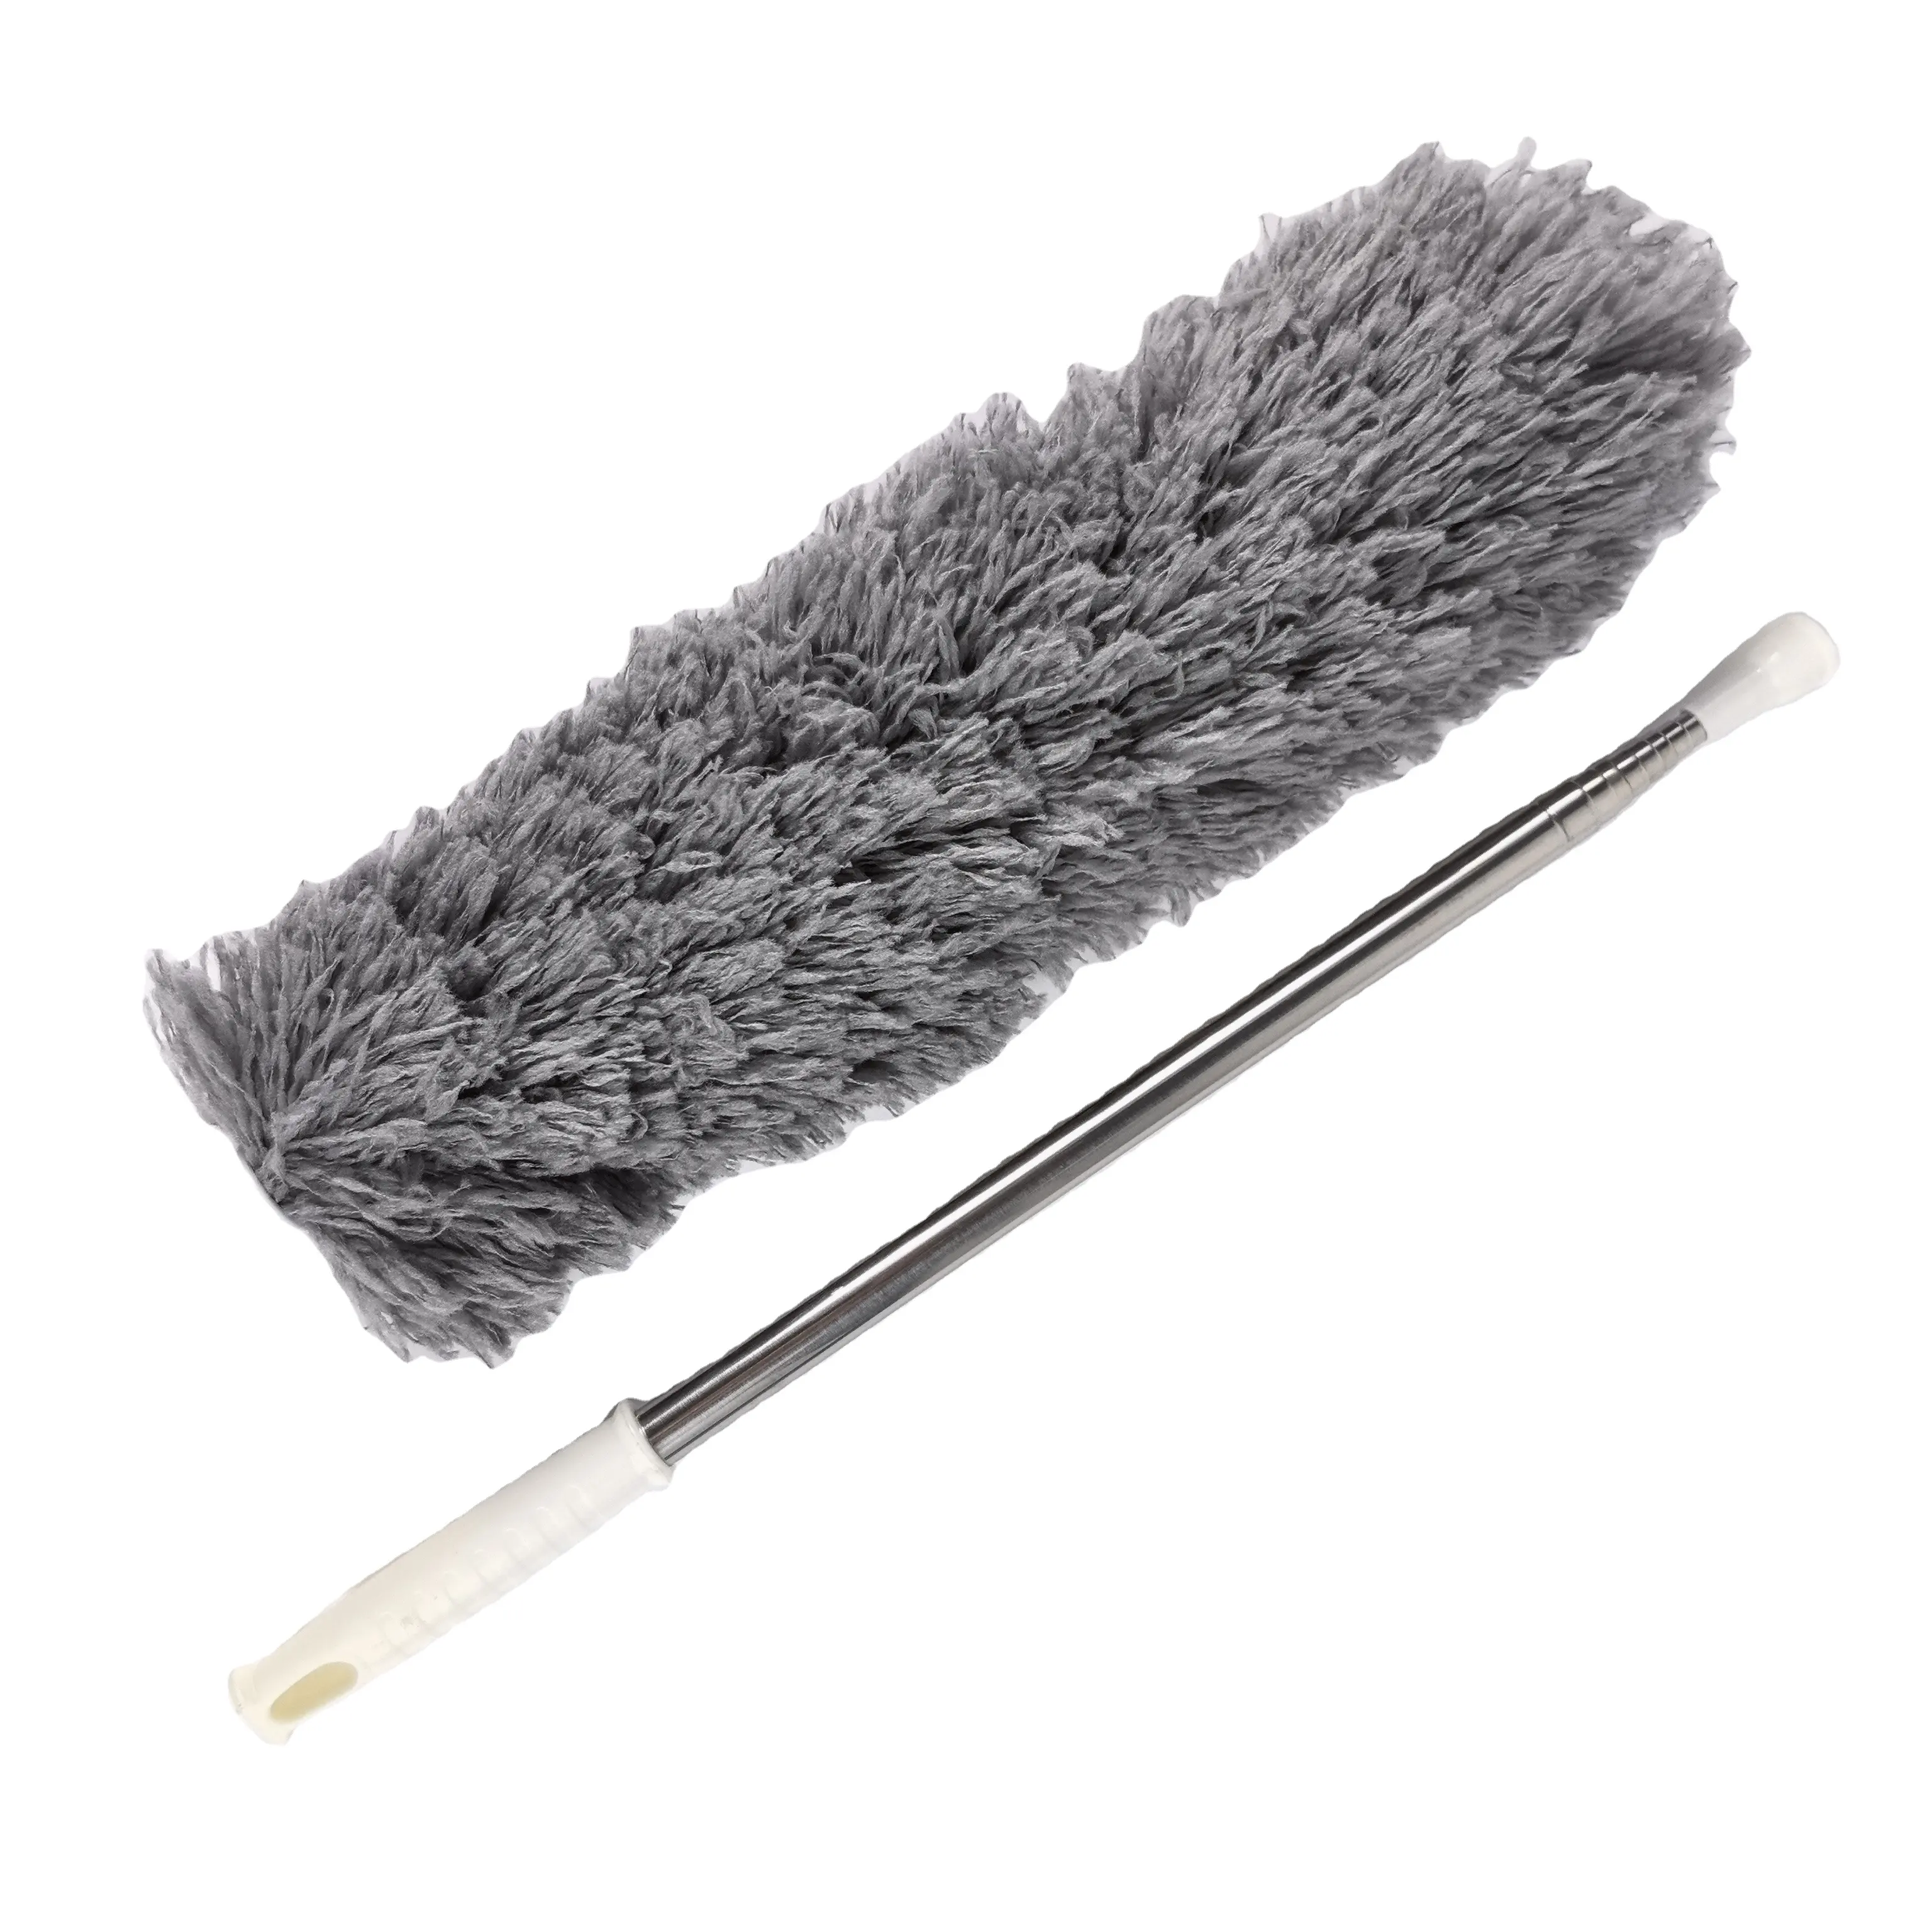 2.8m Telescopic Microfiber Feather Ceiling Duster Versatile Cleaning Tool with Steel Pipe Flexible and Comprehensive